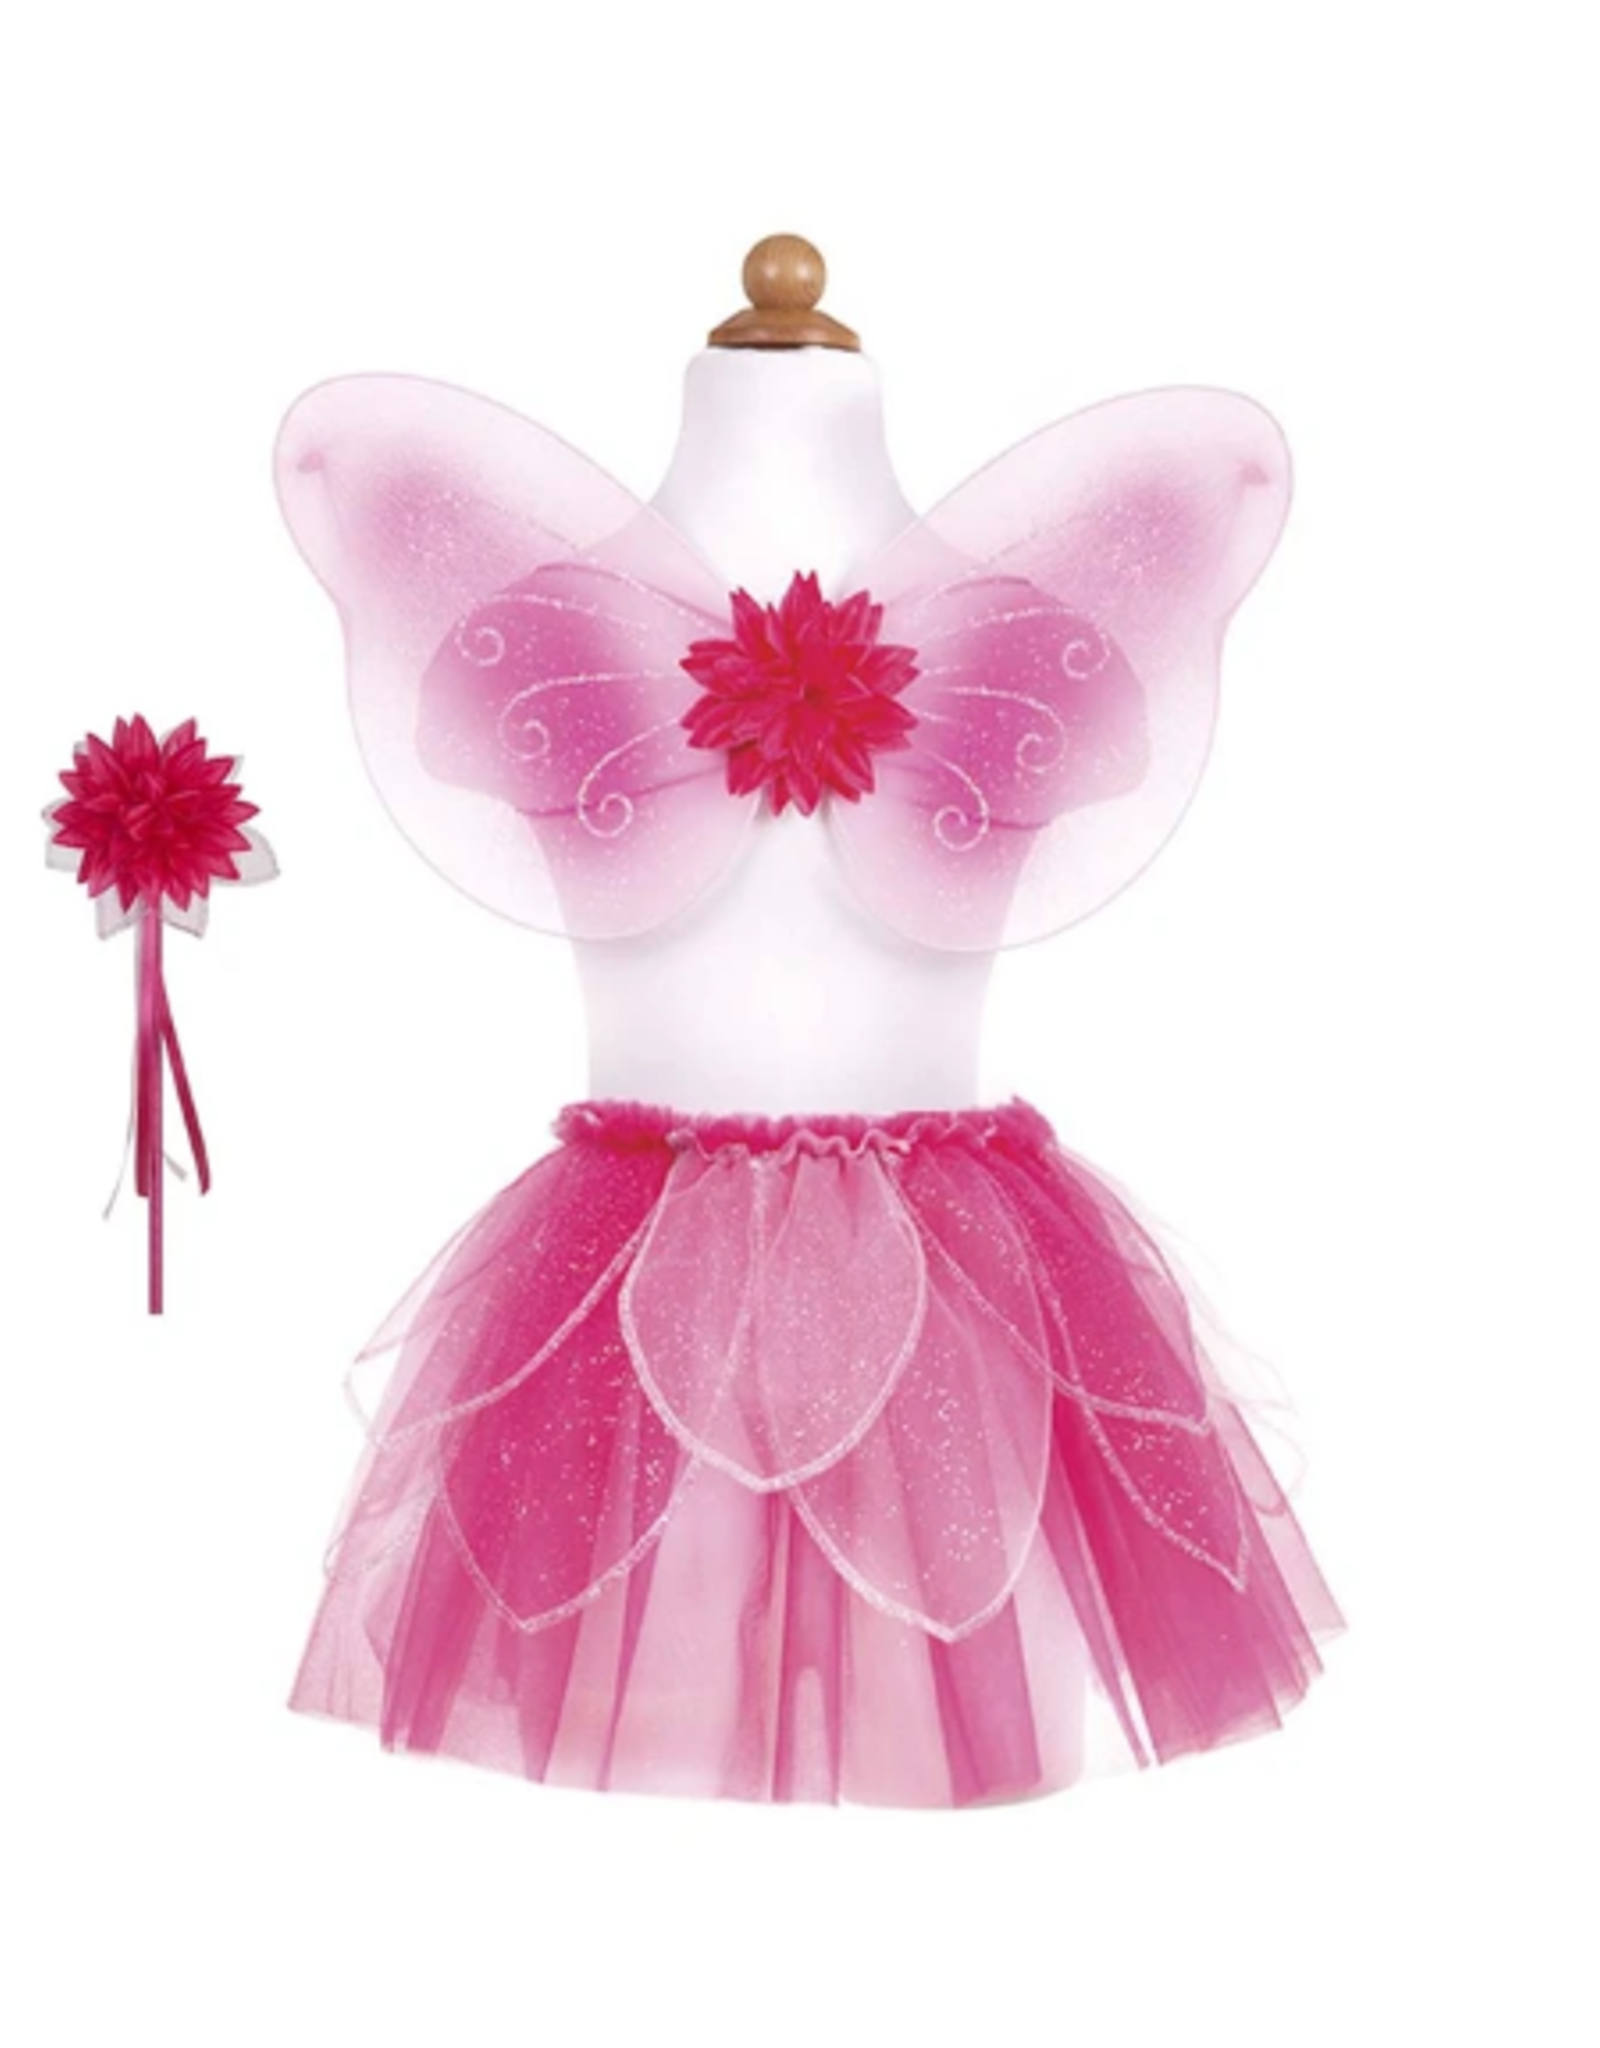 Creative Education Fancy Flutter Skirt w/ wand and wings-Pink, Size 4-6